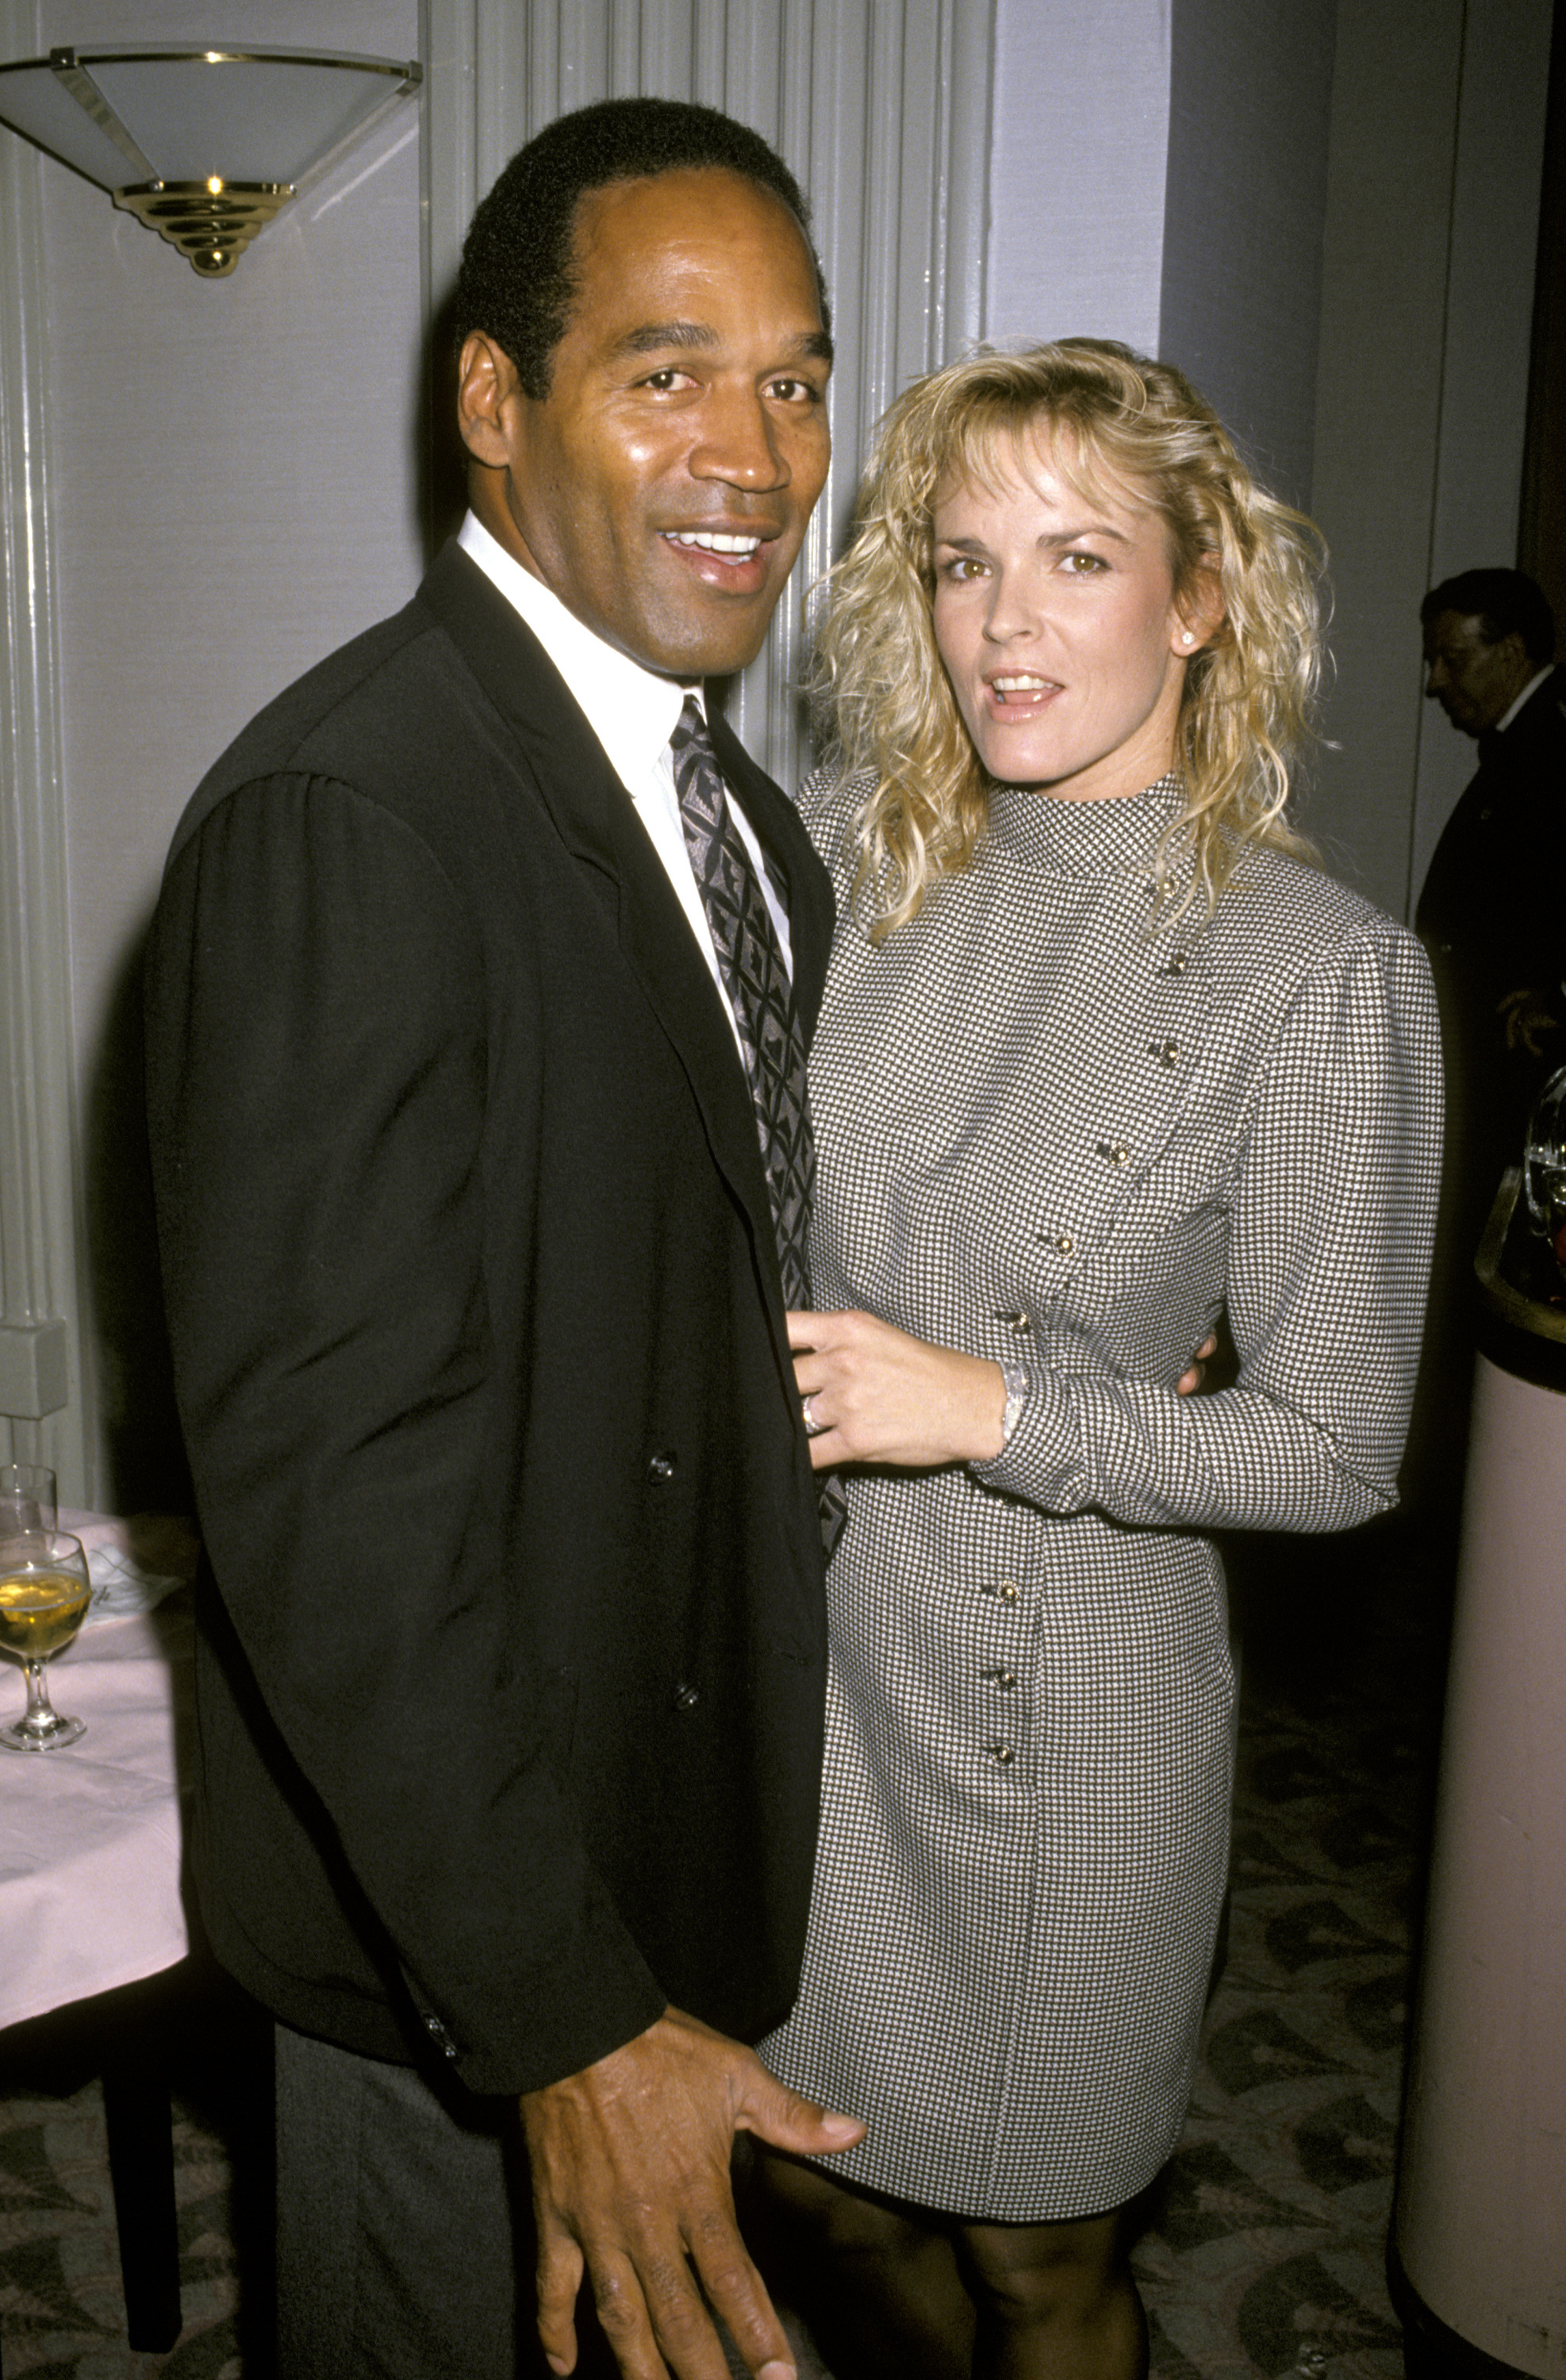 O.J. Simpson and Nicole Brown Simpson posing together, Nicole in a patterned dress with buttons, O.J. in a suit with striped tie